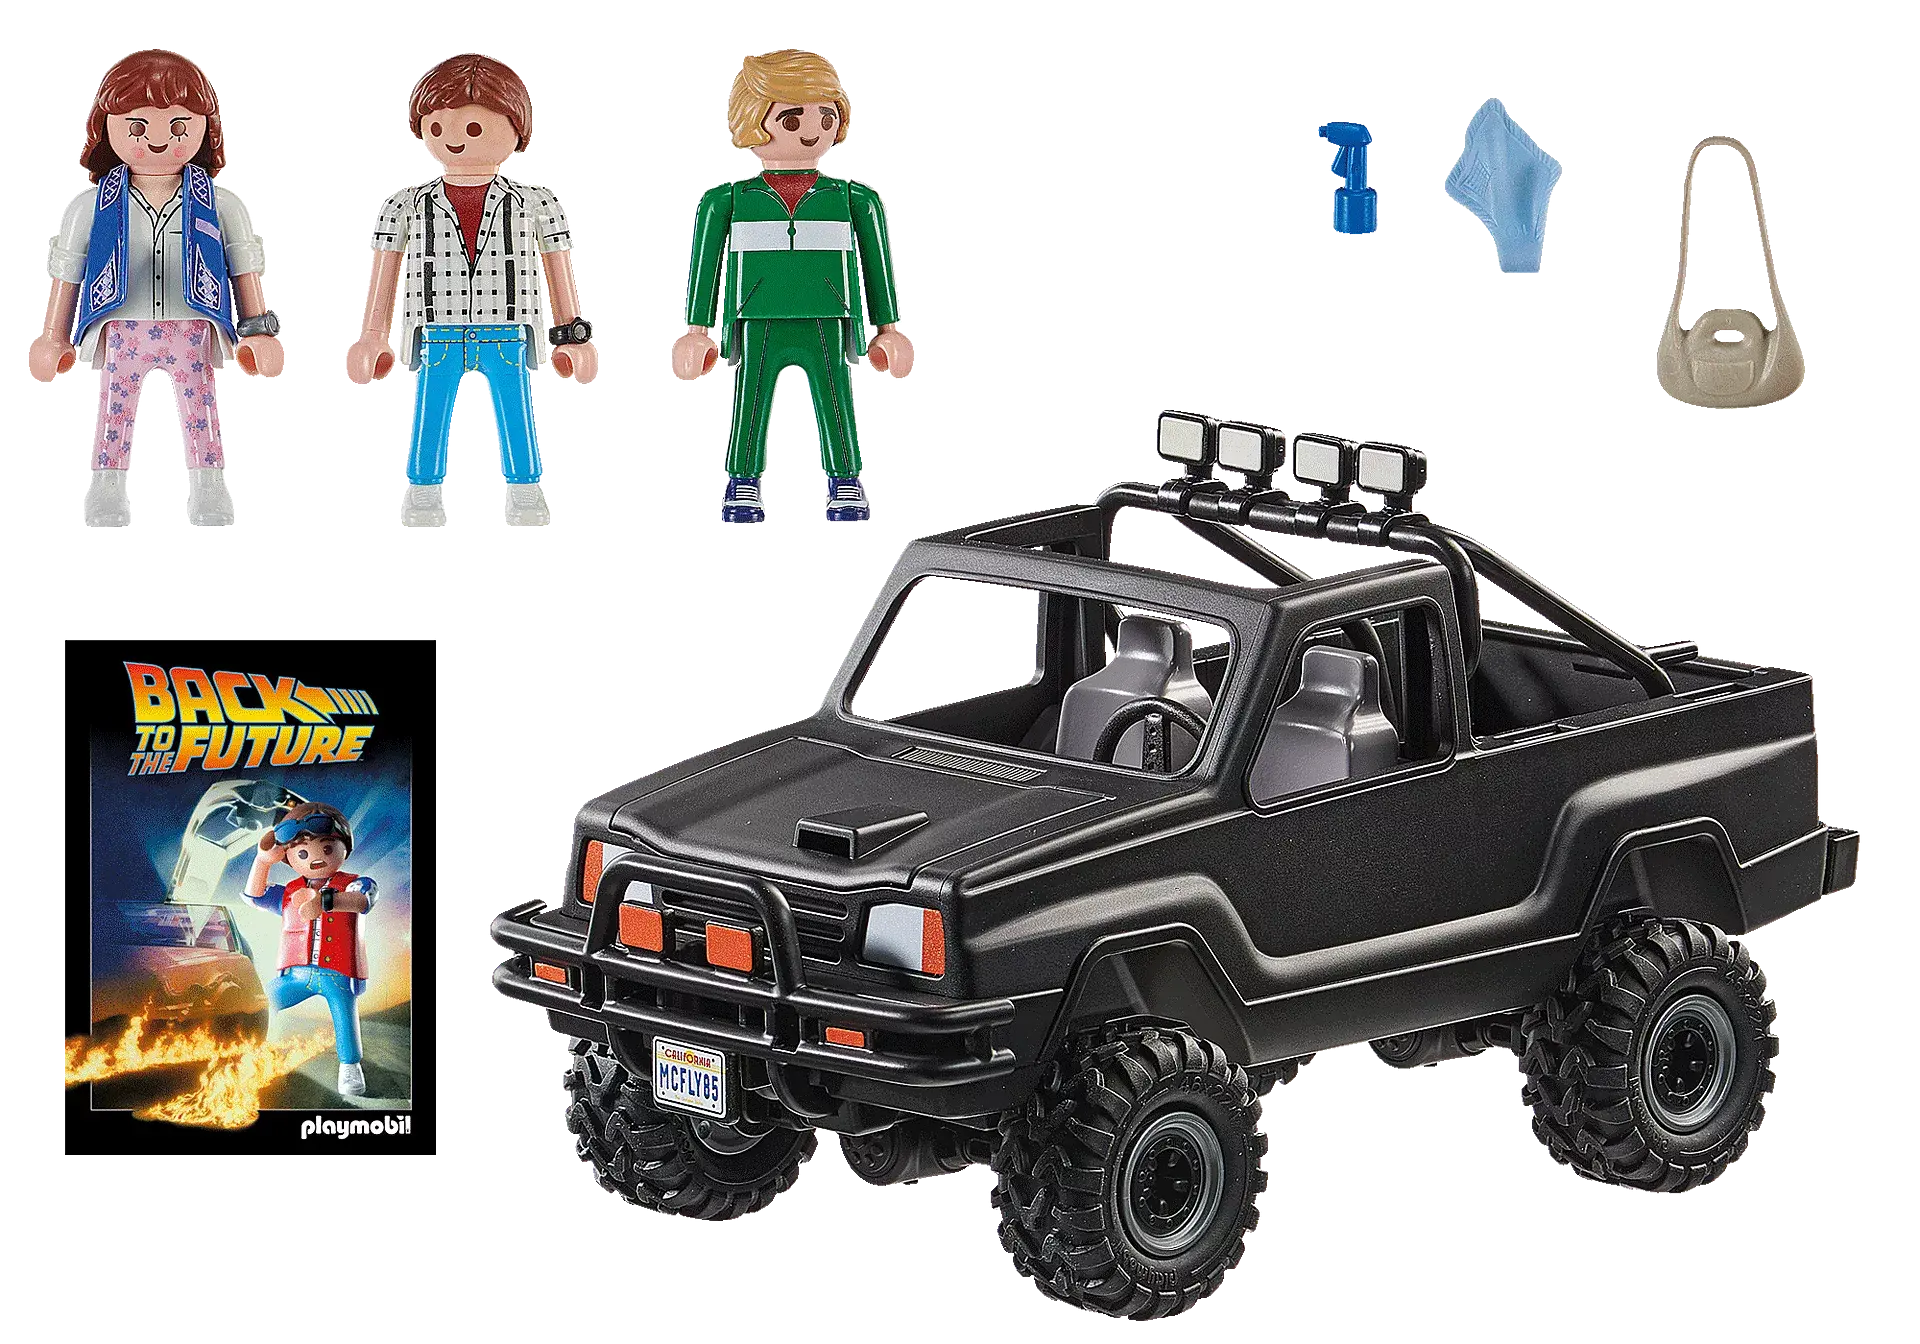 Playmobil *****Playmobil Back to the Future 70633 - Pick-up de Marty